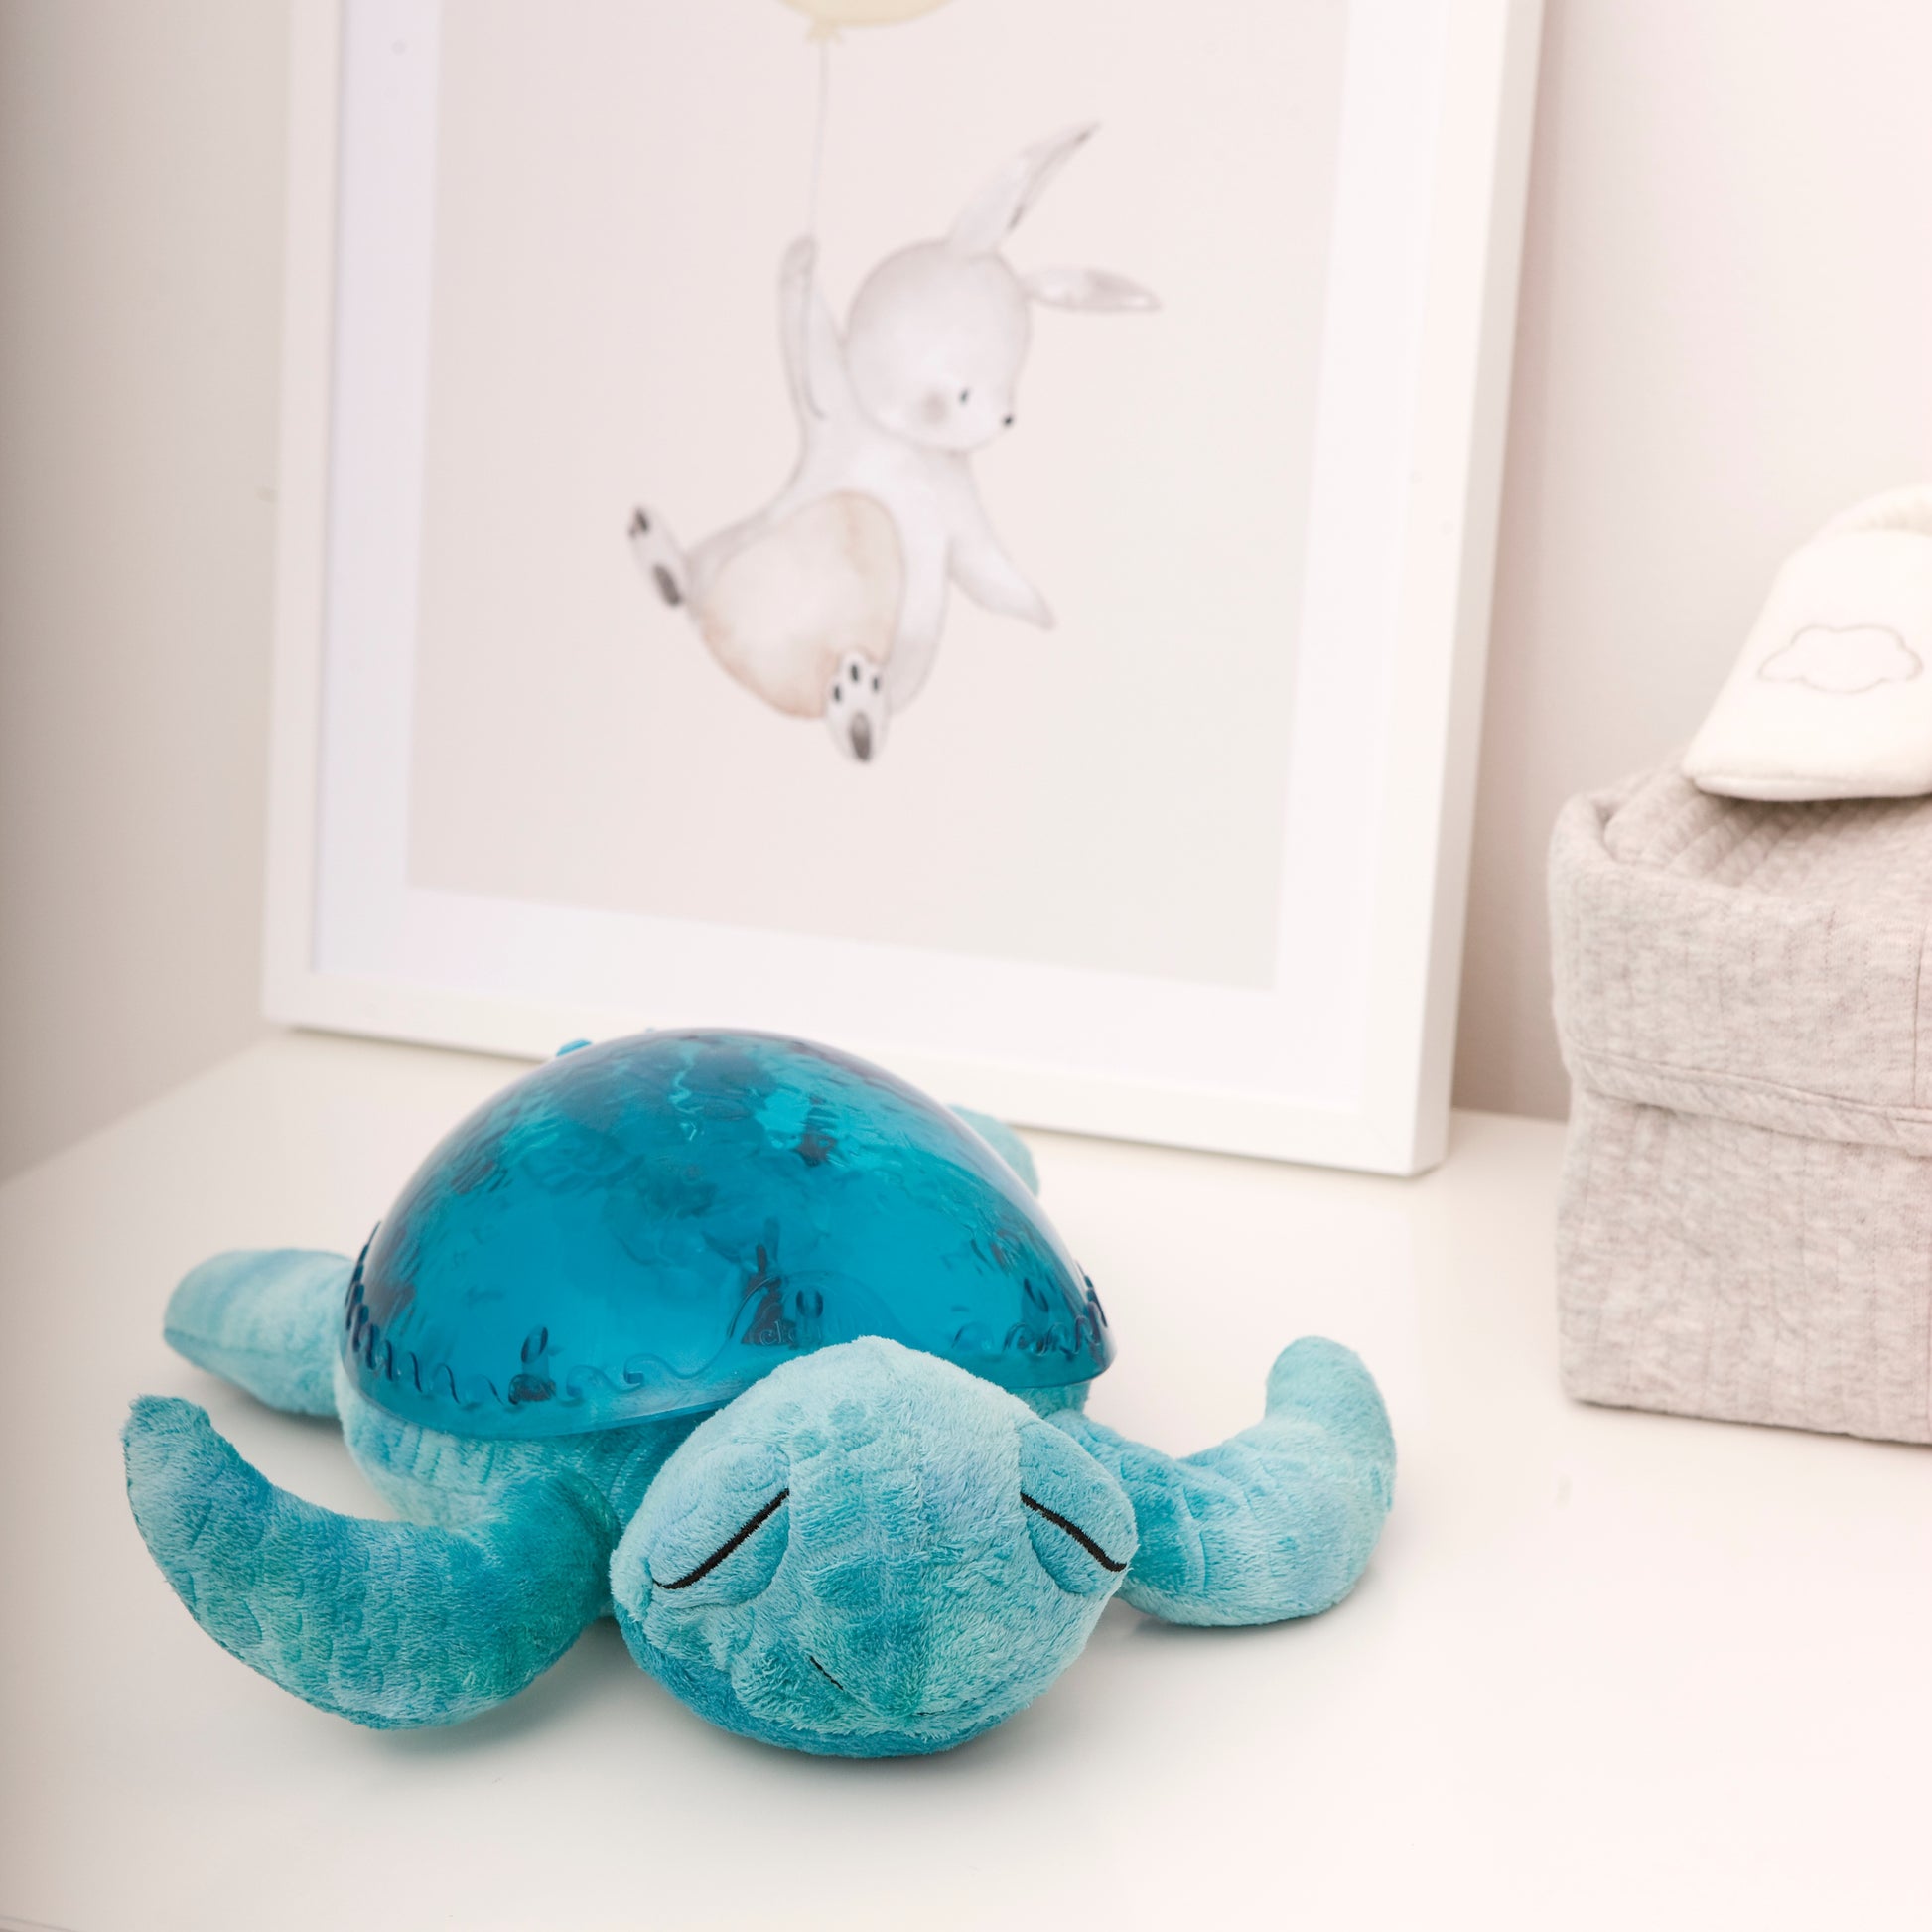 Peluche Veilleuse Musicale Tranquil Turtle Rose Cloud B